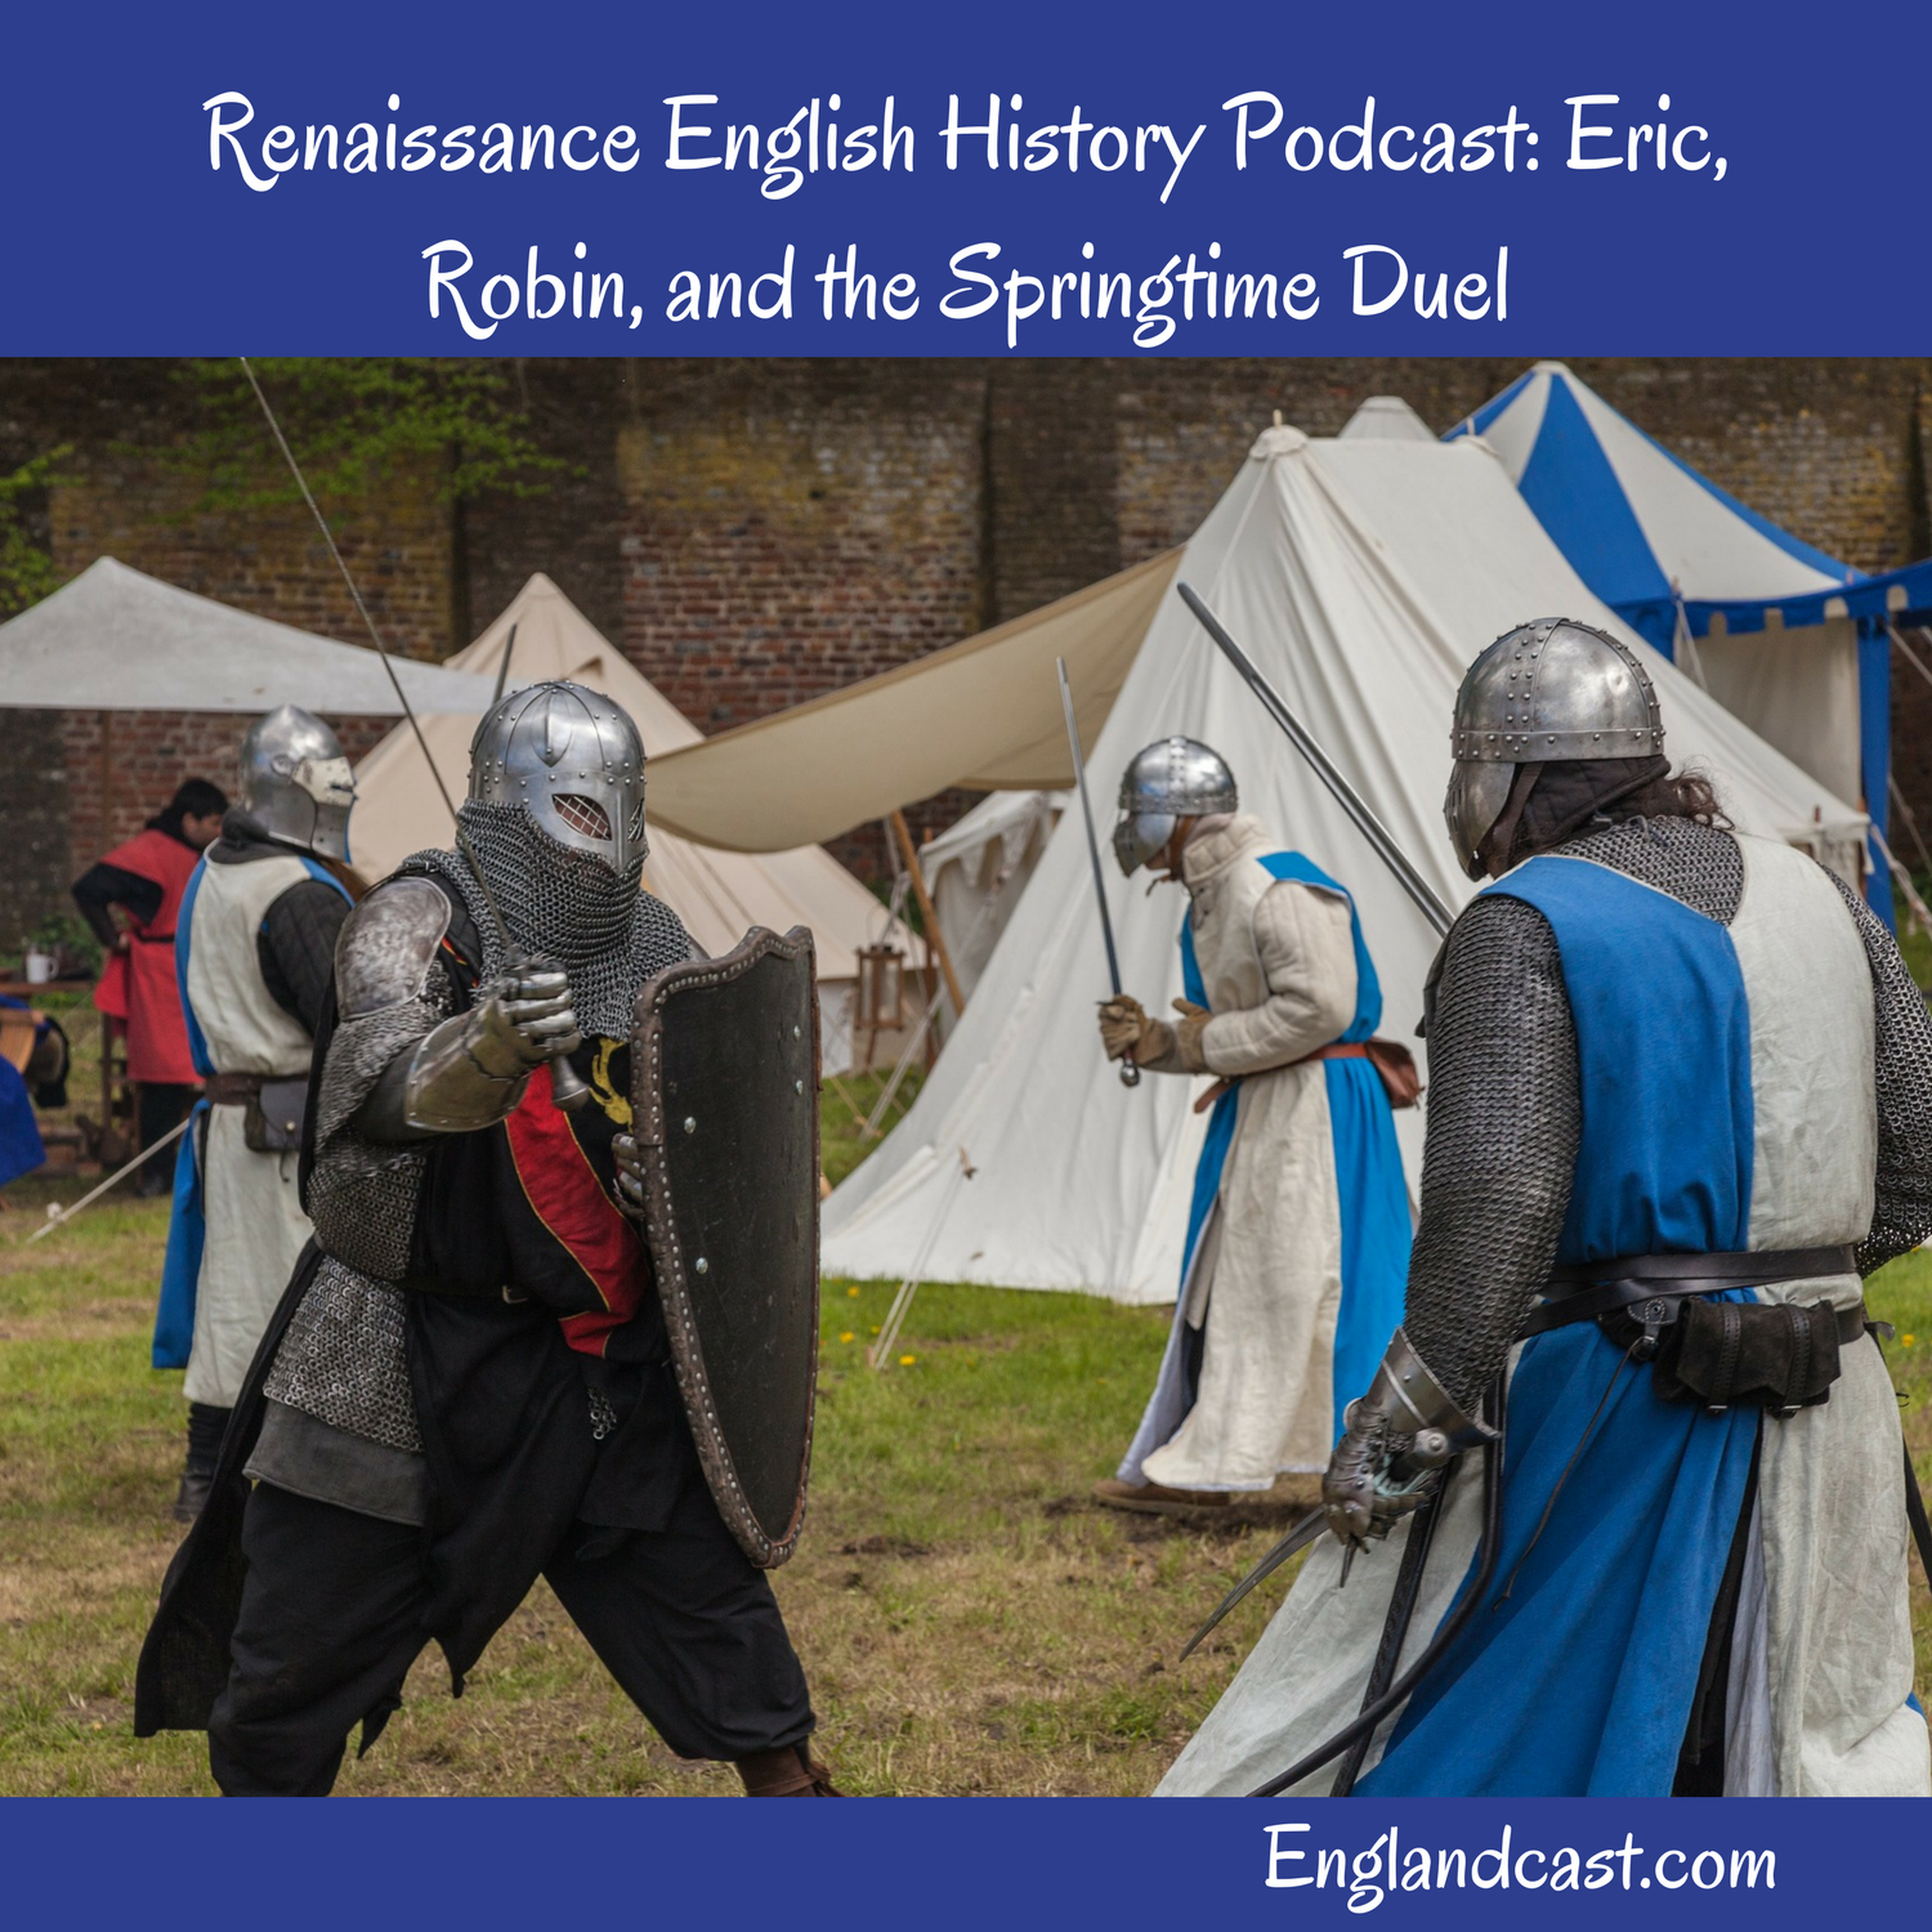 Supplemental: Eric, Robert, and the Springtime Duel